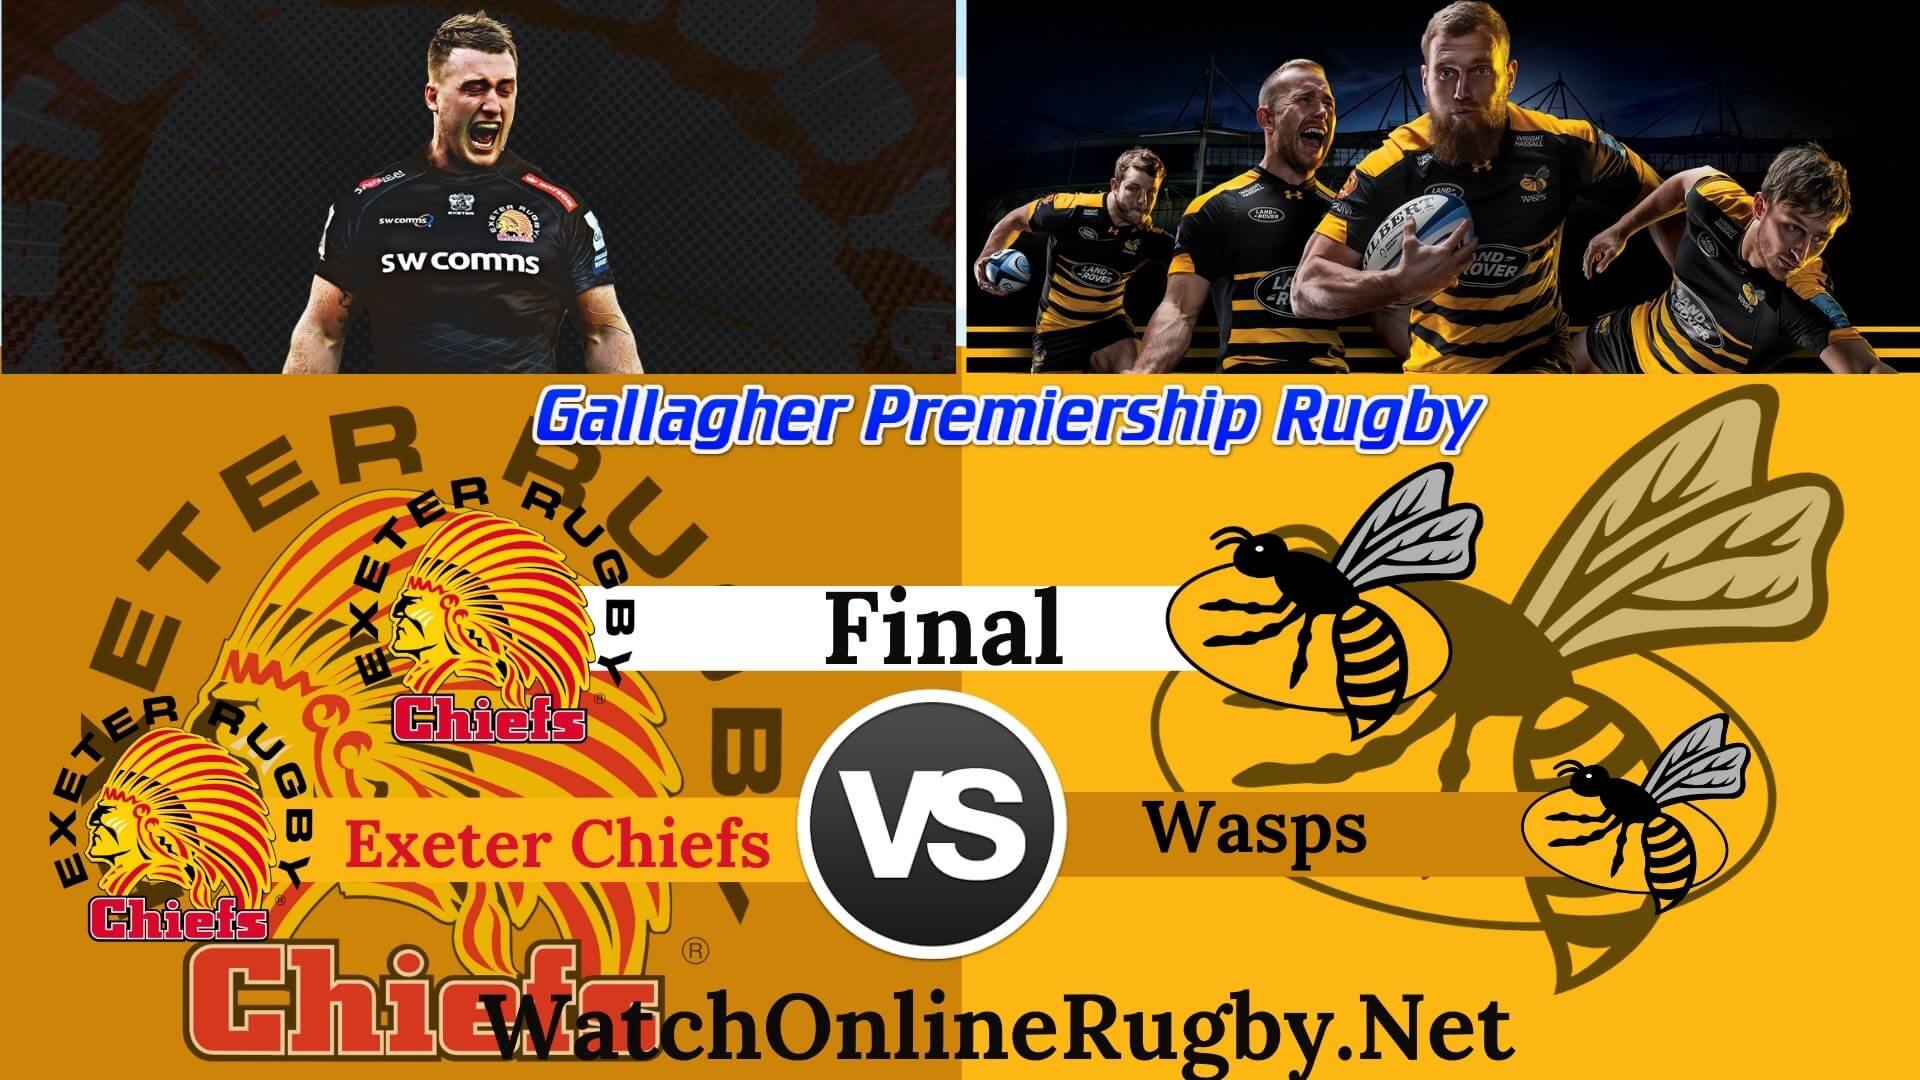 Wasps vs Chiefs Aviva Rugby Final Live